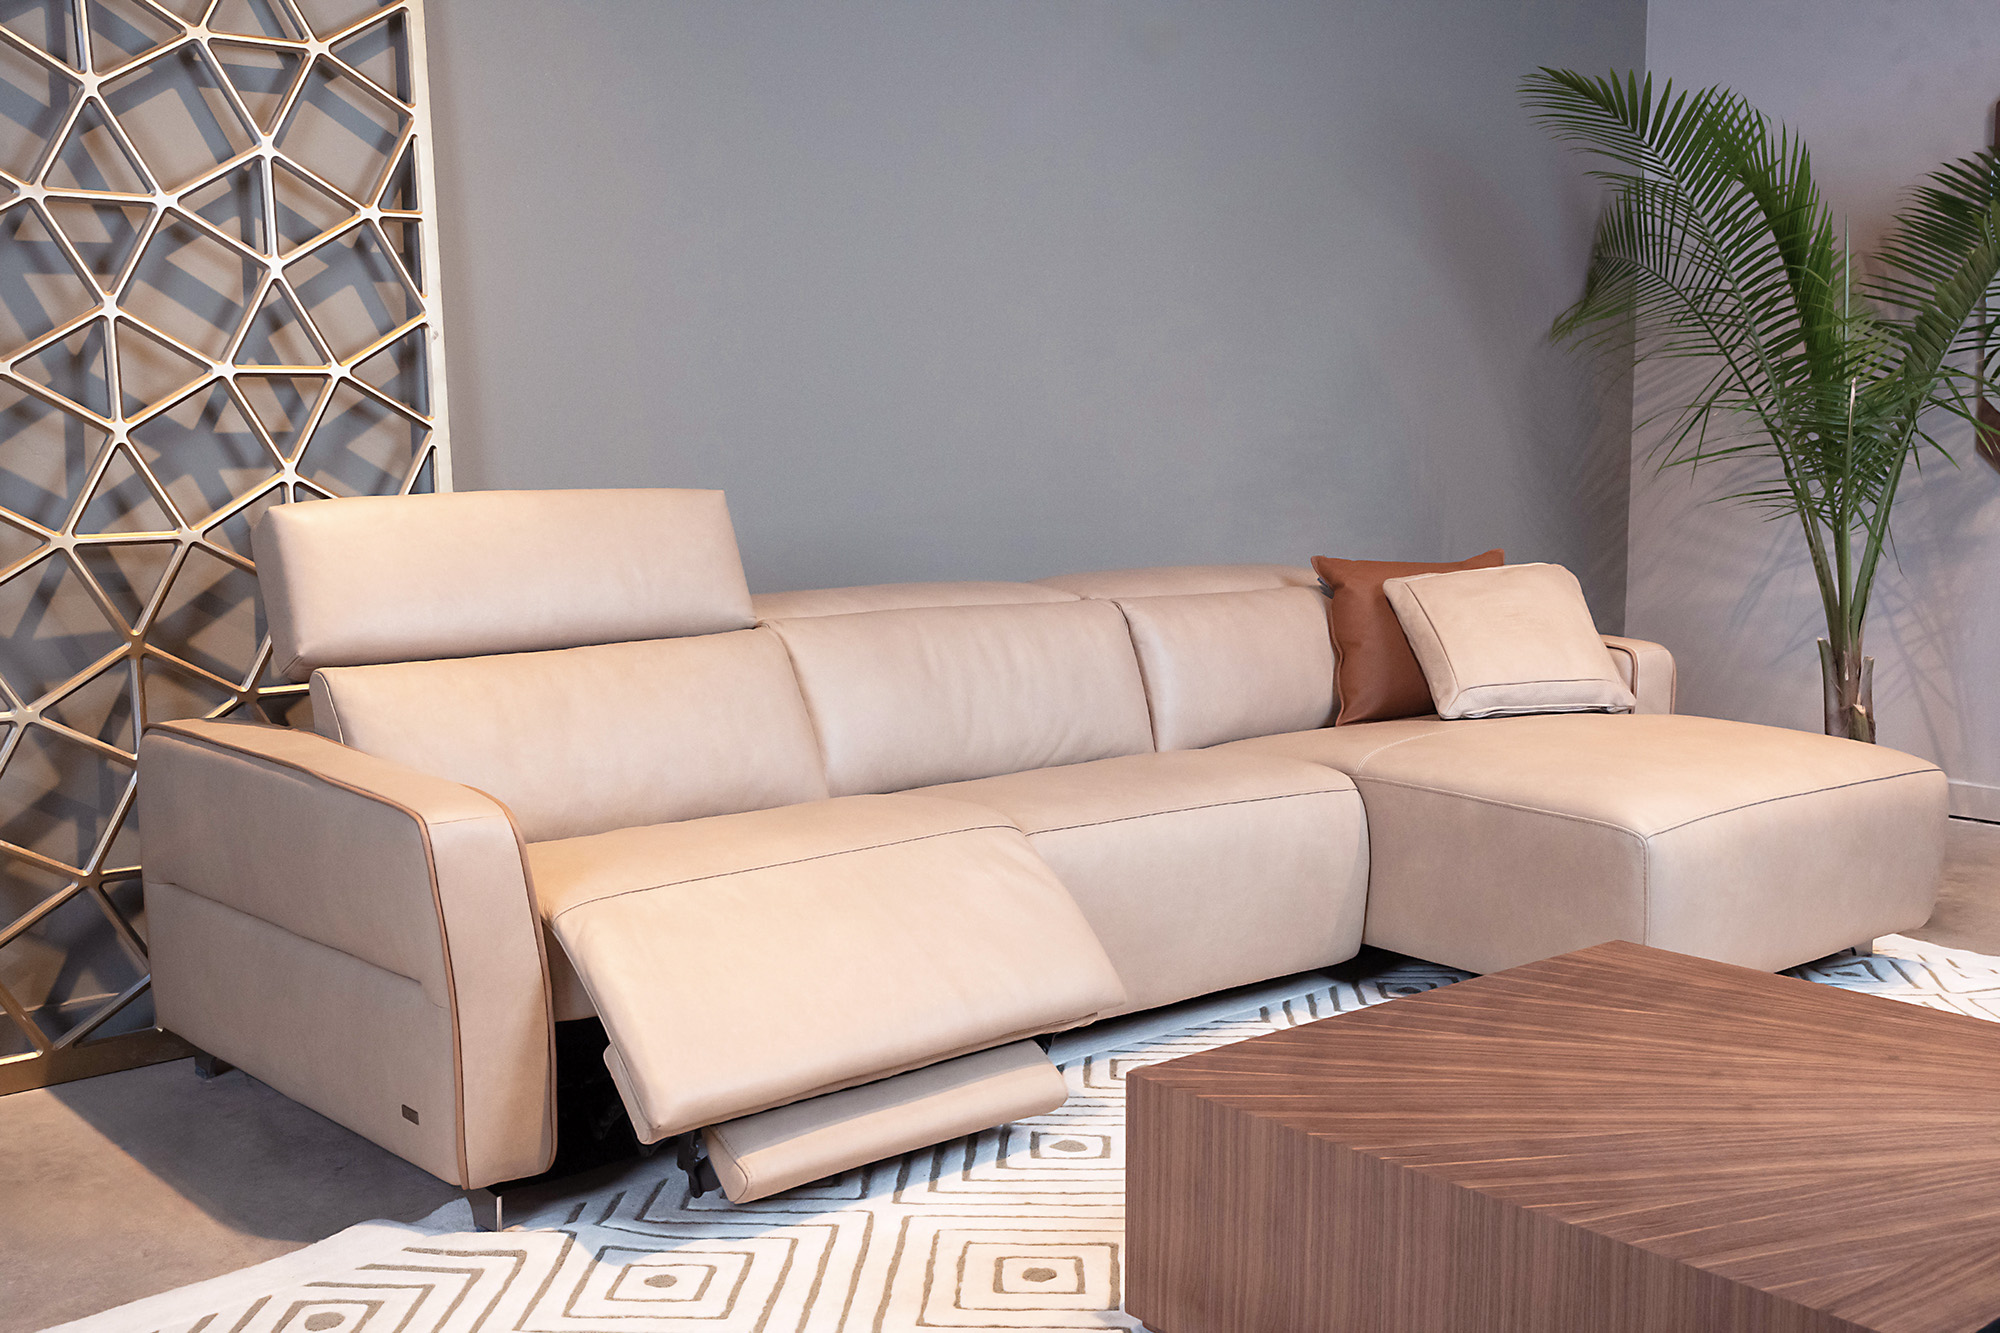 A picture of a tan leather sectional sofa in a modern living room, with the nearest seat reclined back and its footrest extended